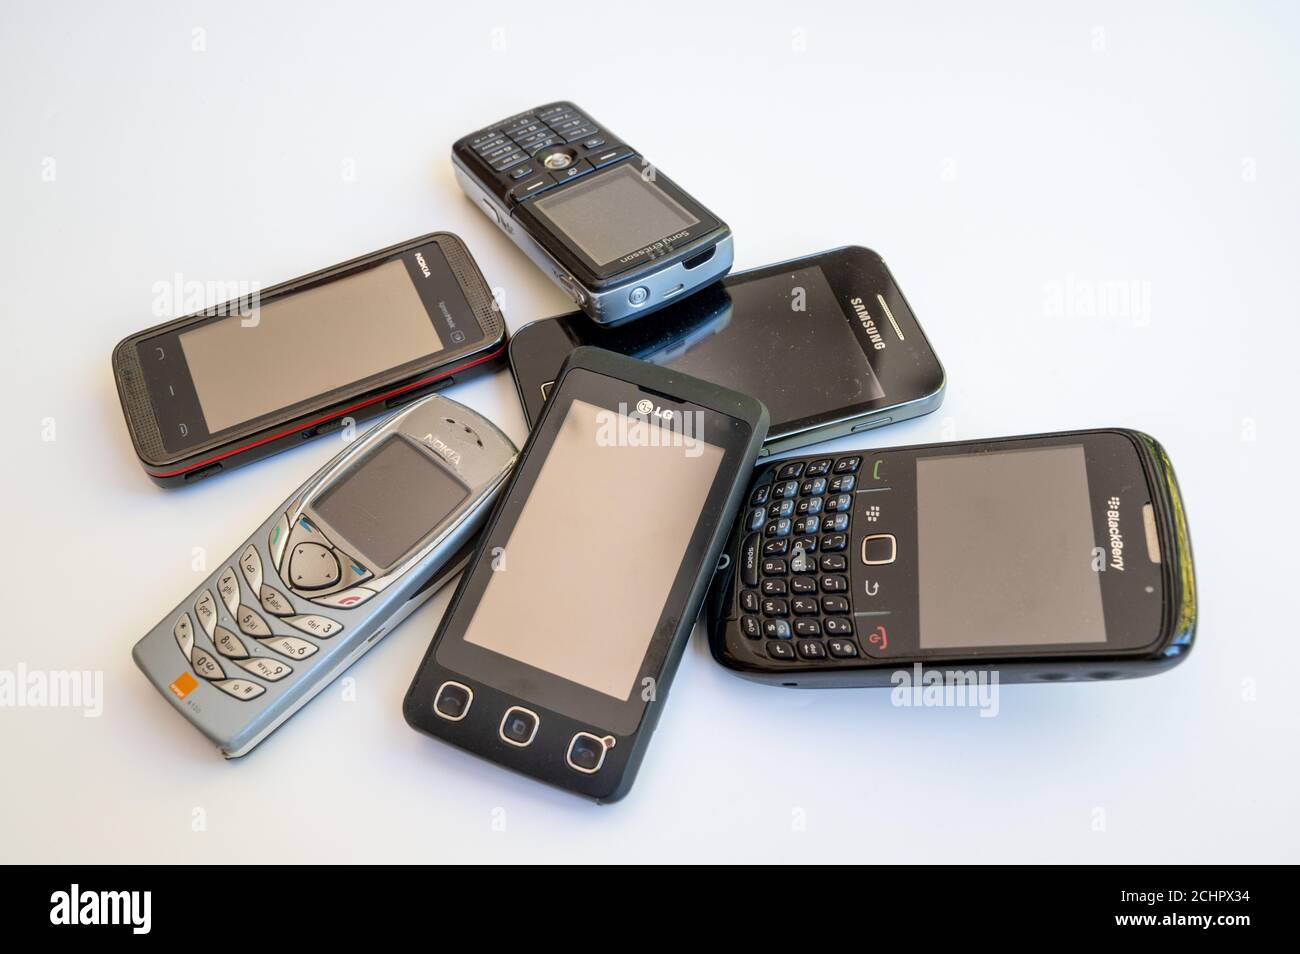 A selection of old mobile phones in a pile on white background. Stock Photo